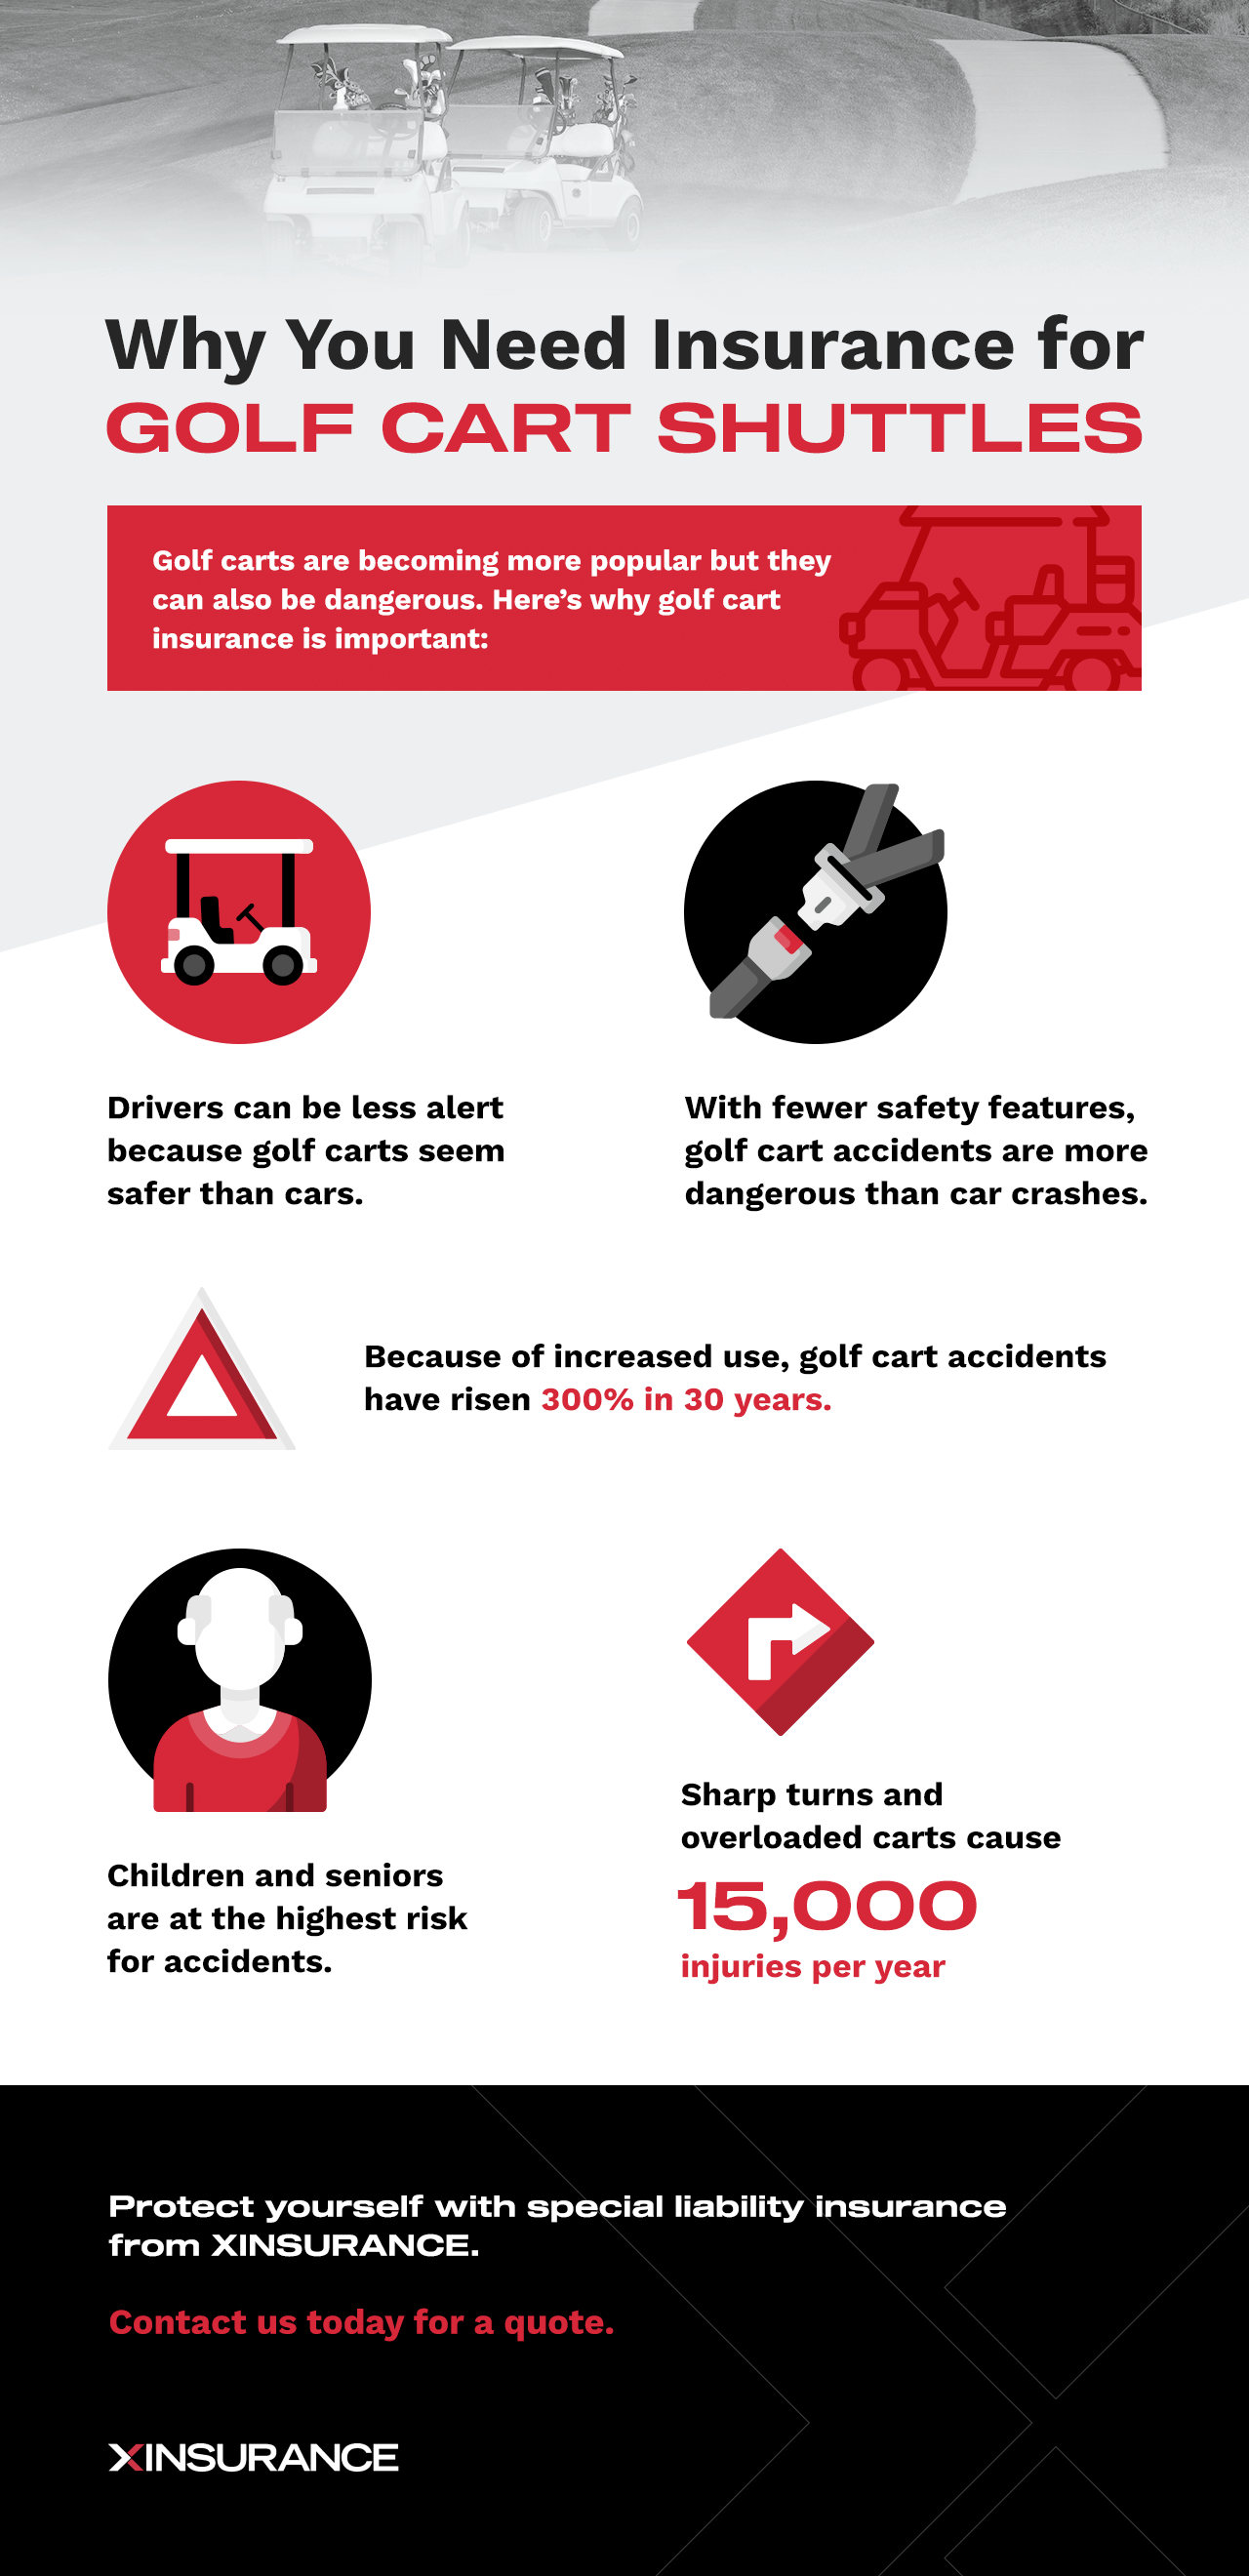 Infographic on why you need insurance for golf cart shuttles